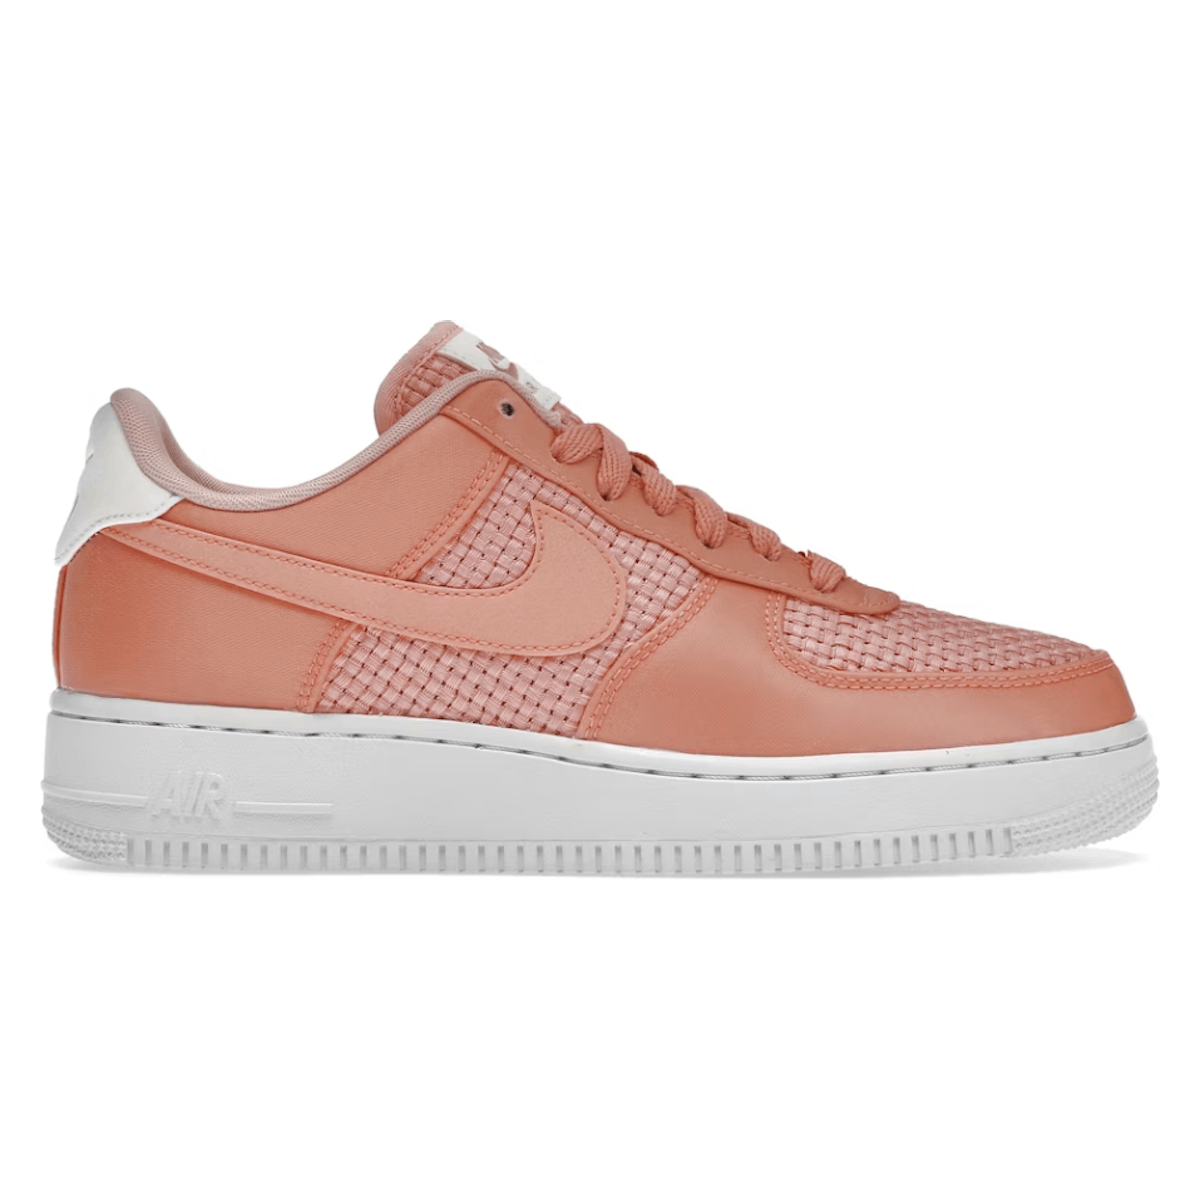 Nike Air Force 1 '07 Low SE Woven Crimson Bliss